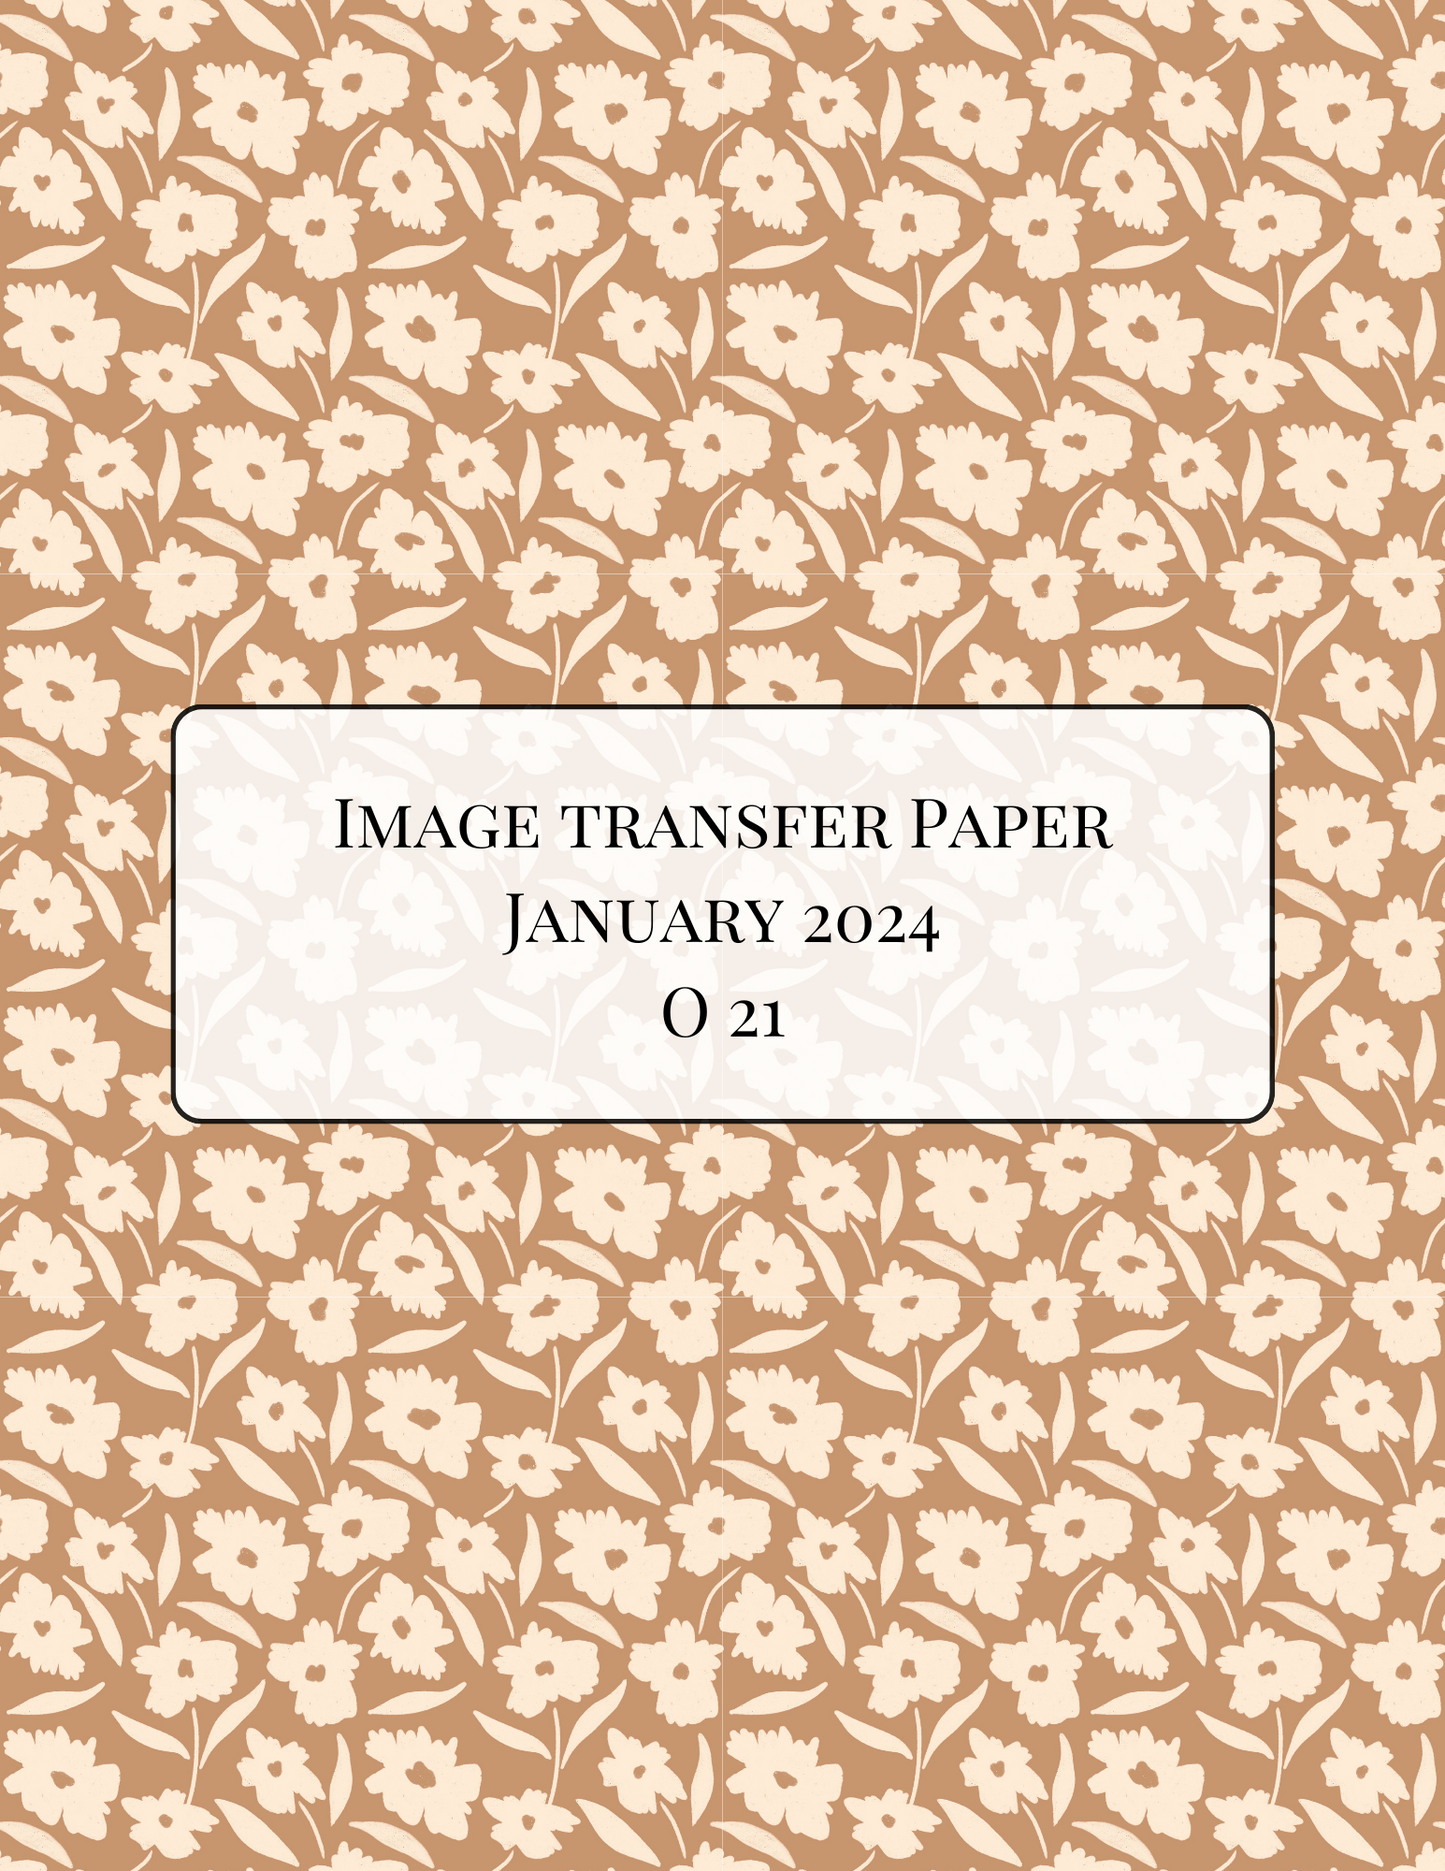 O21 Transfer Paper - January Launch